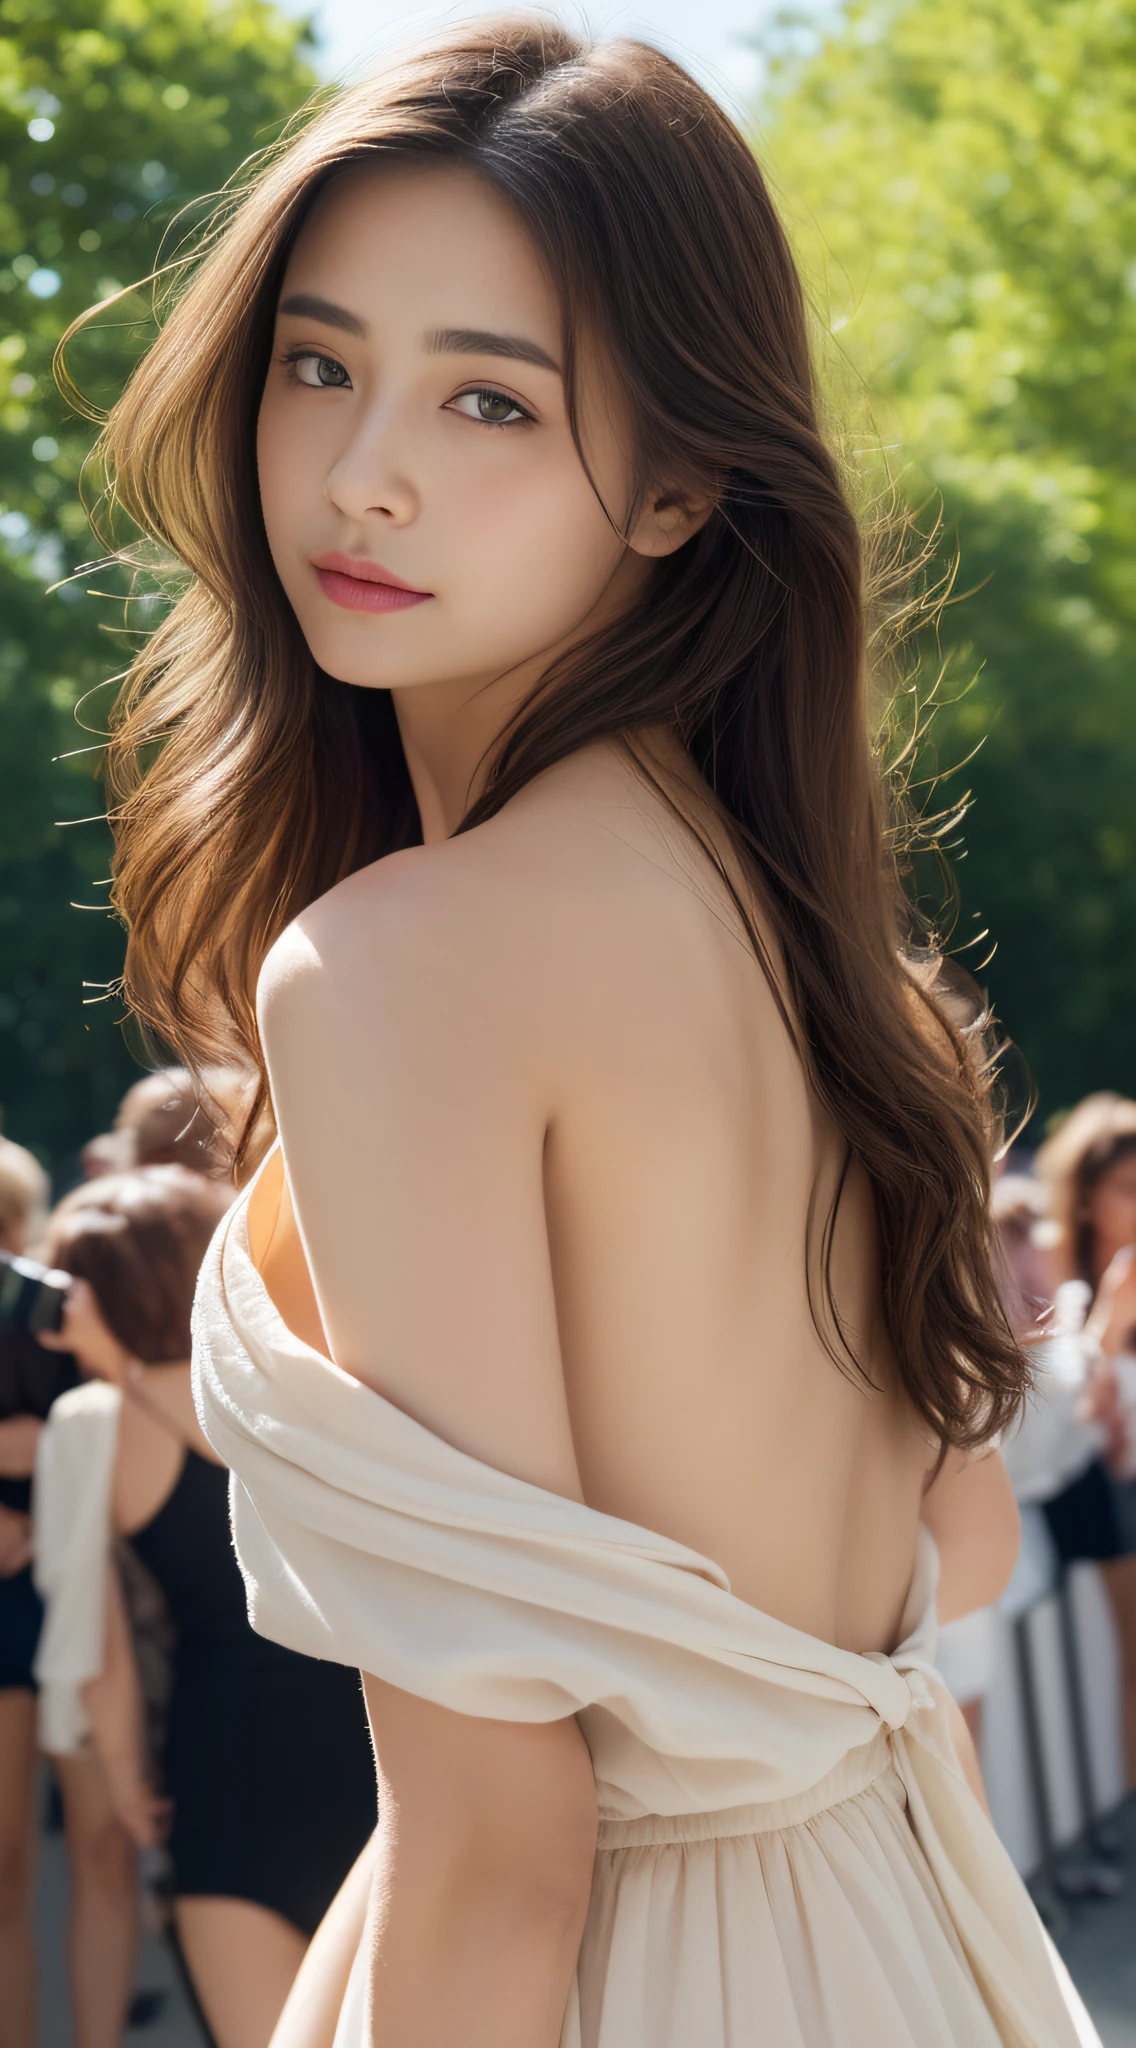 (top-quality、hight resolution、​masterpiece:1.3)、(g-cup、cleavage of the breast)、full body Esbian、A tall and pretty woman、Slender Abs、Dark brown hair styled in loose waves、breastsout、Off-the-shoulder gothic dresses、long slit、(Beautiful legs and thighs)、(Crowds in the park on the background)、Details exquisitely rendered in the face and skin texture、A detailed eye、double eyelid